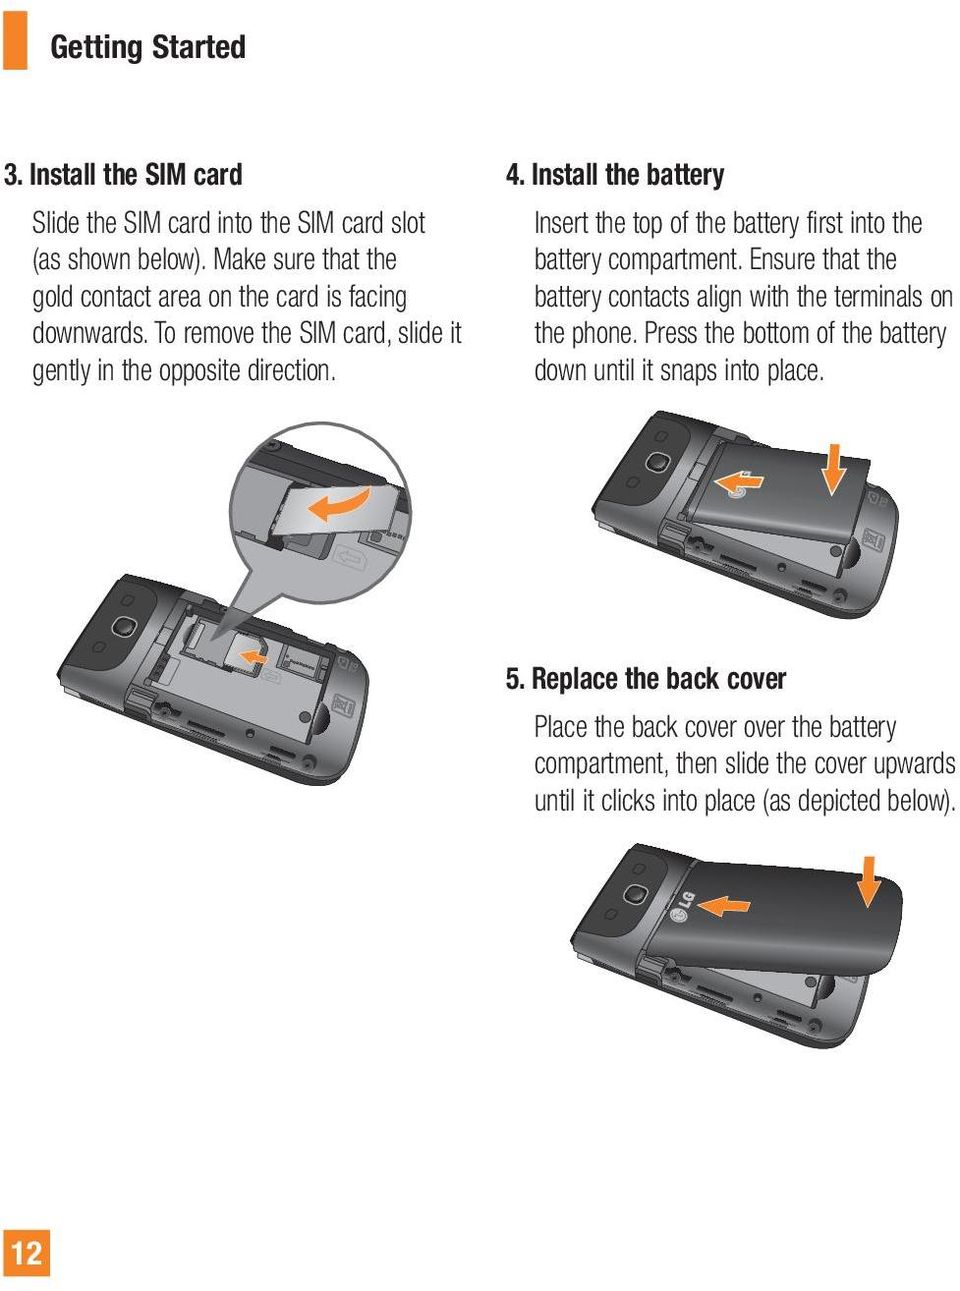 Install the battery Insert the top of the battery first into the battery compartment.